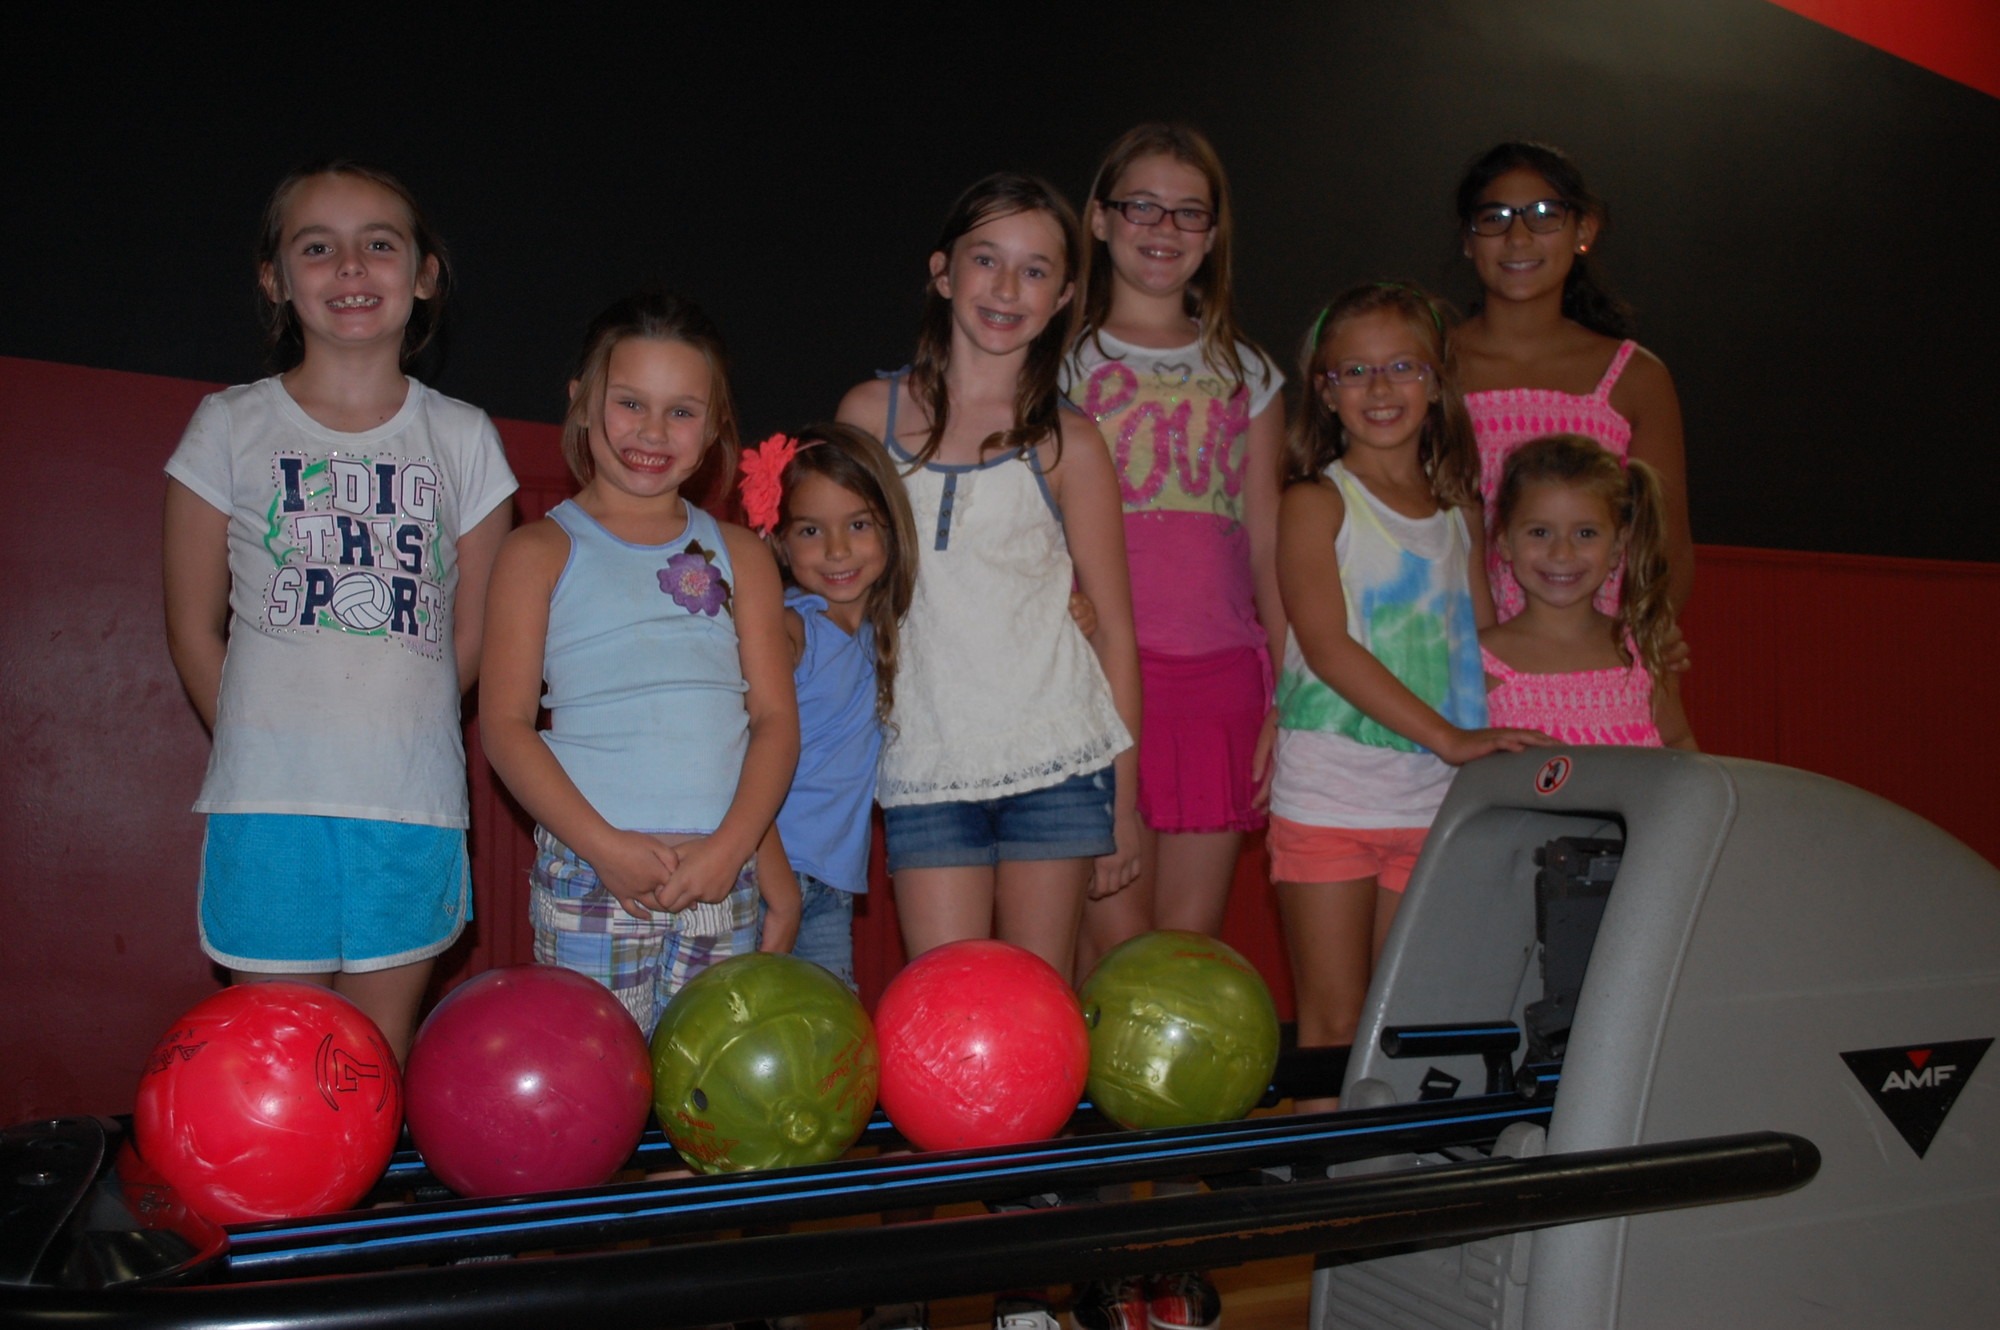 Children who participated in the Wantagh Public Library’s summer reading program were invited to a bowling party last Friday evening. From left are Kaitlin Dillon, Madison Allan, Sophia Cornella, Samantha Allan, Lily Bennett, Alexandra Corrella, Alexa Gottlieb and Addison Gottlieb.